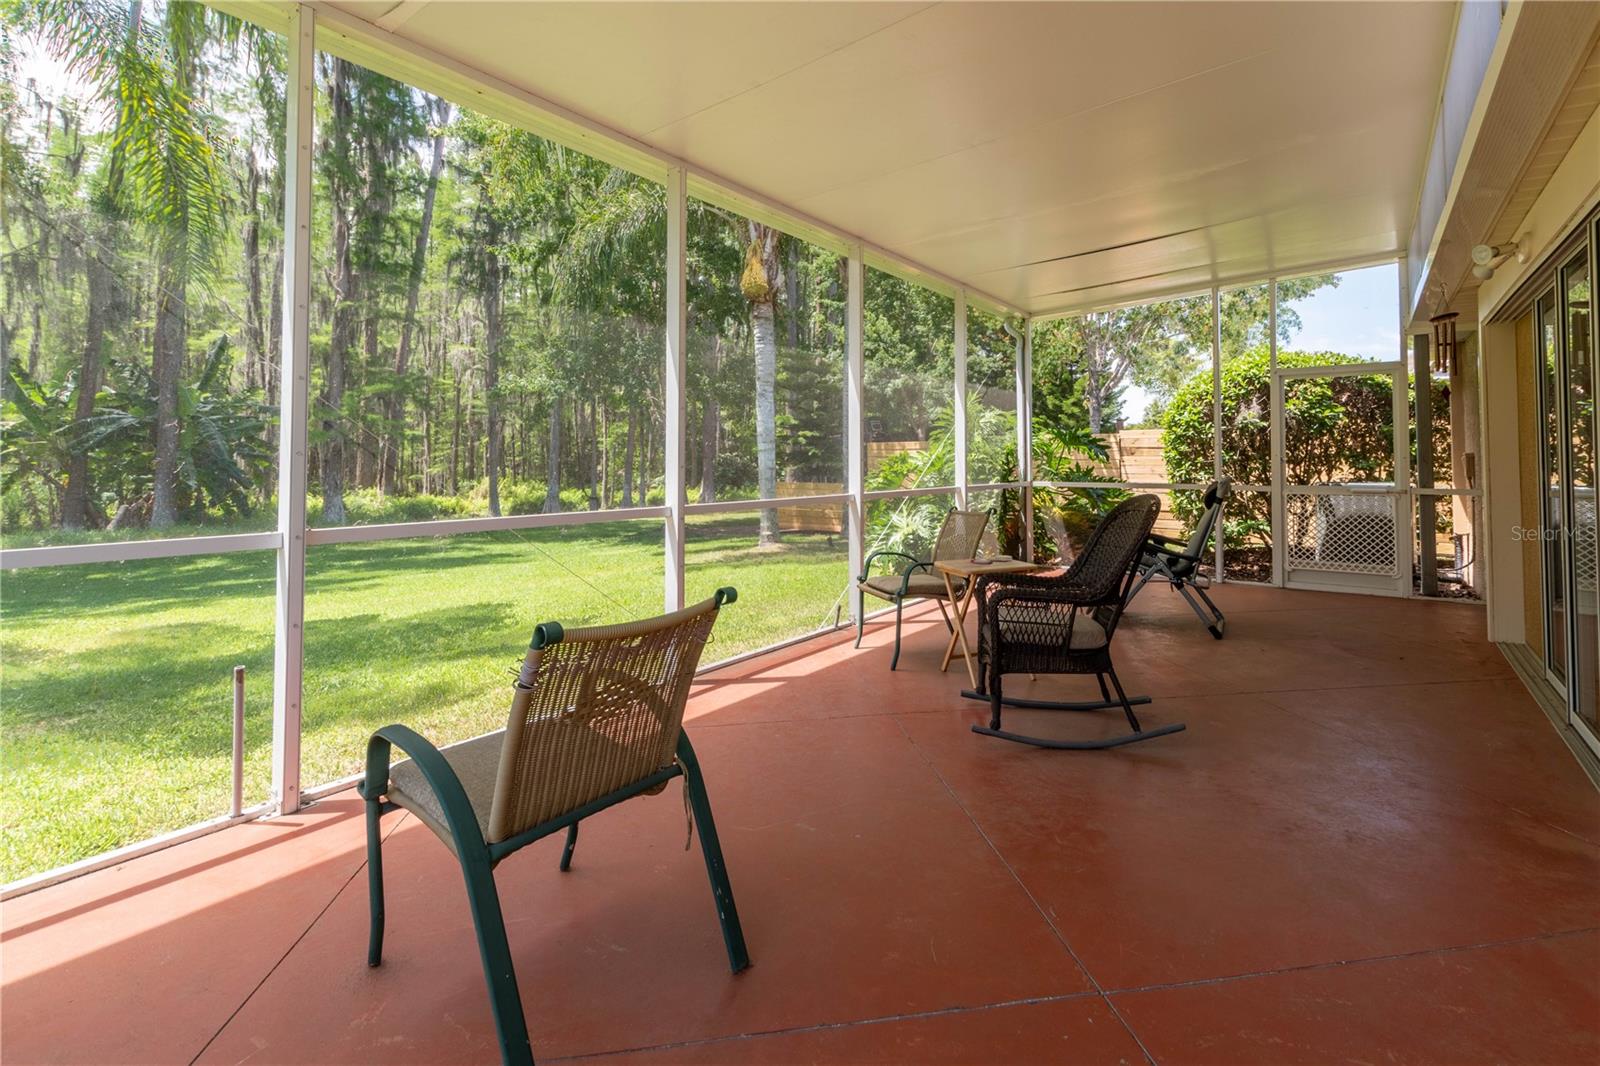 Sit and relax in the Lanai. Watch the view of the lovely backyard.